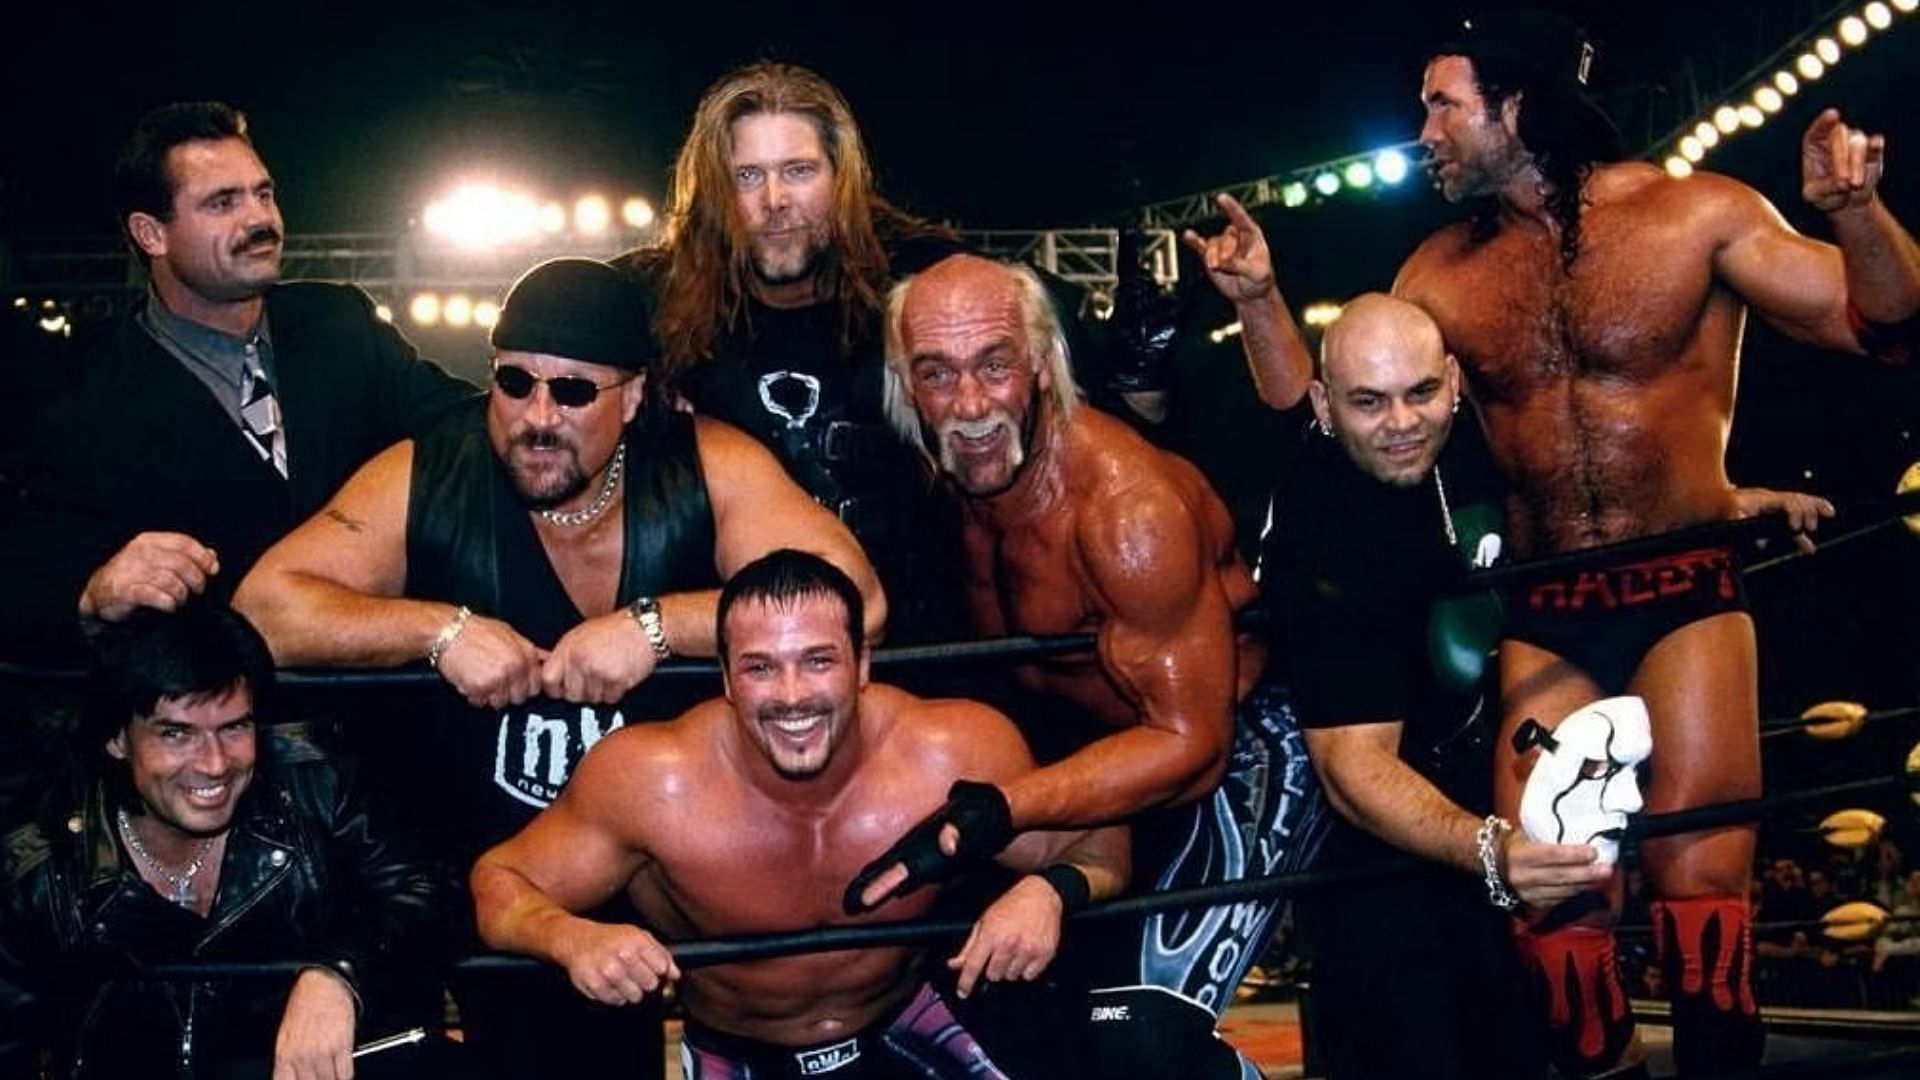 The nWo have influenced many modern day pro wrestlers.